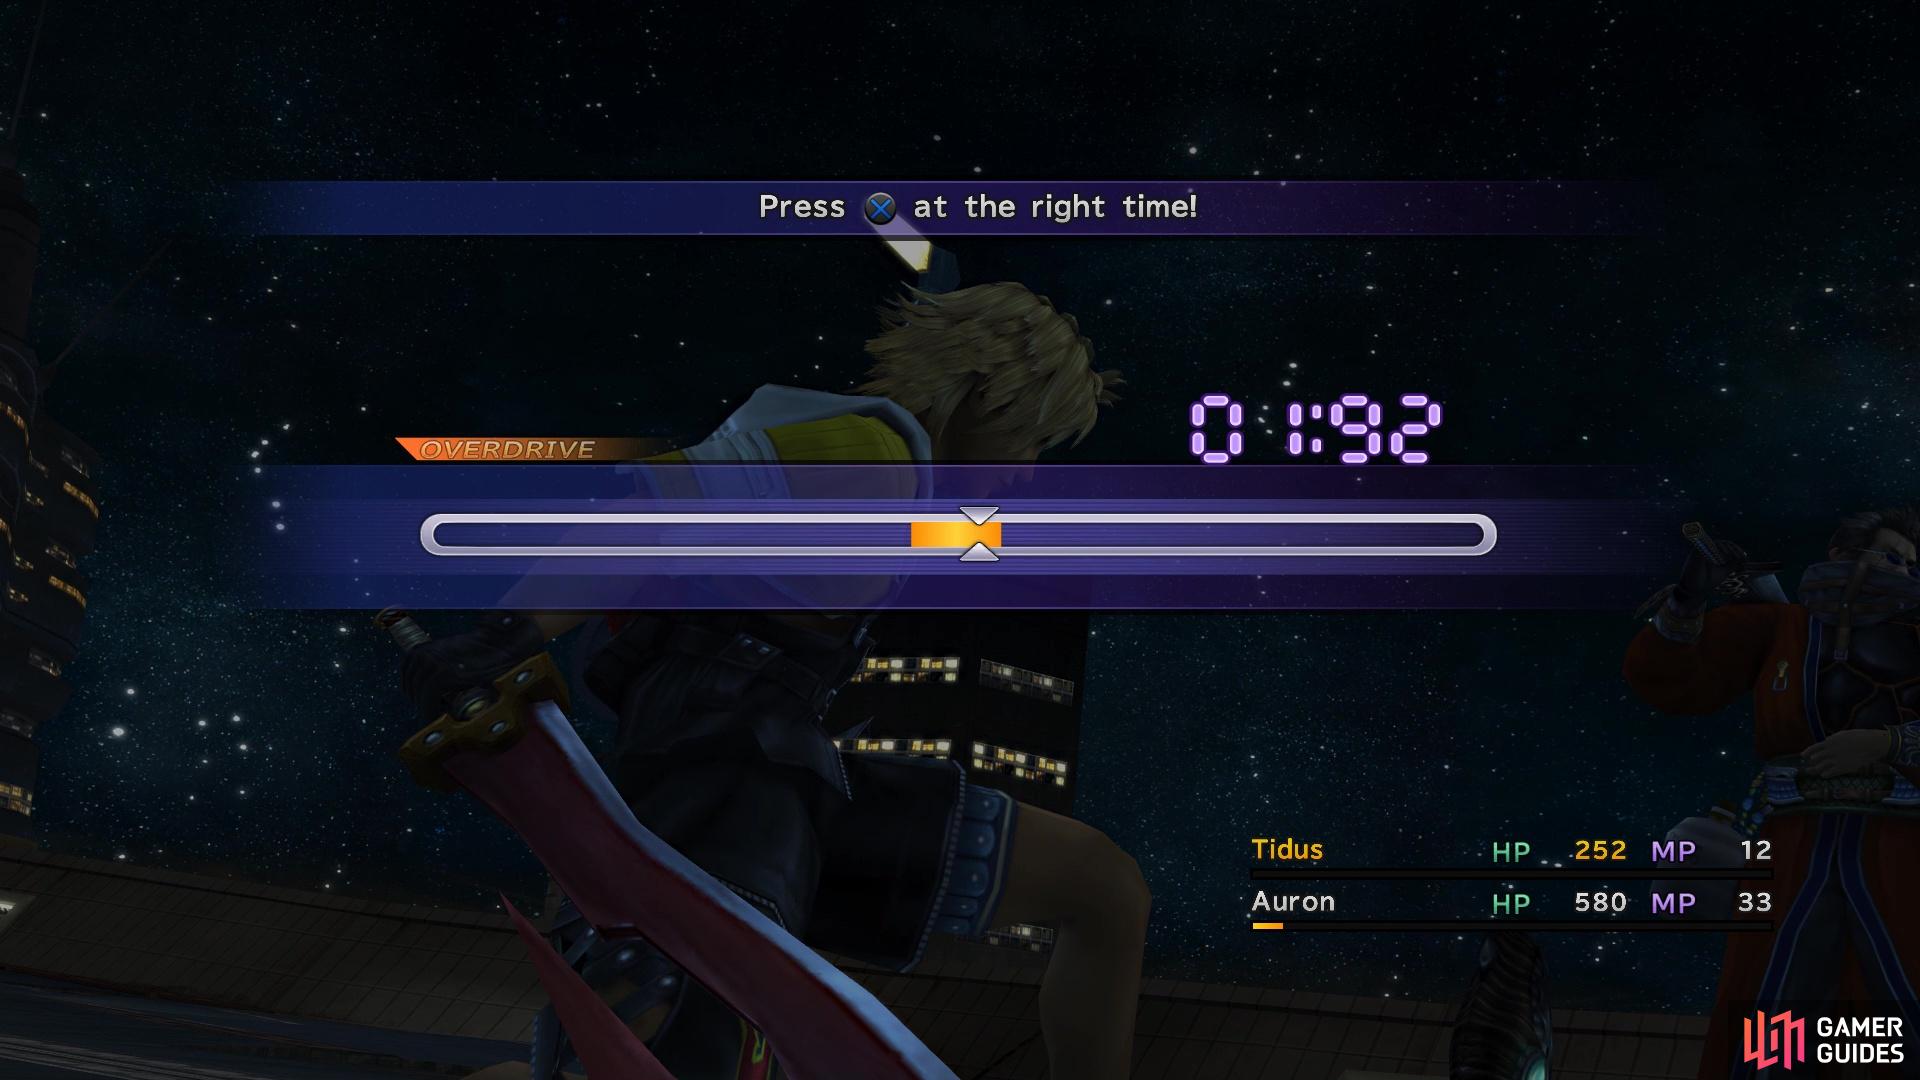 Tidus' Overdrive has you stopping a cursor in the middle of the gauge